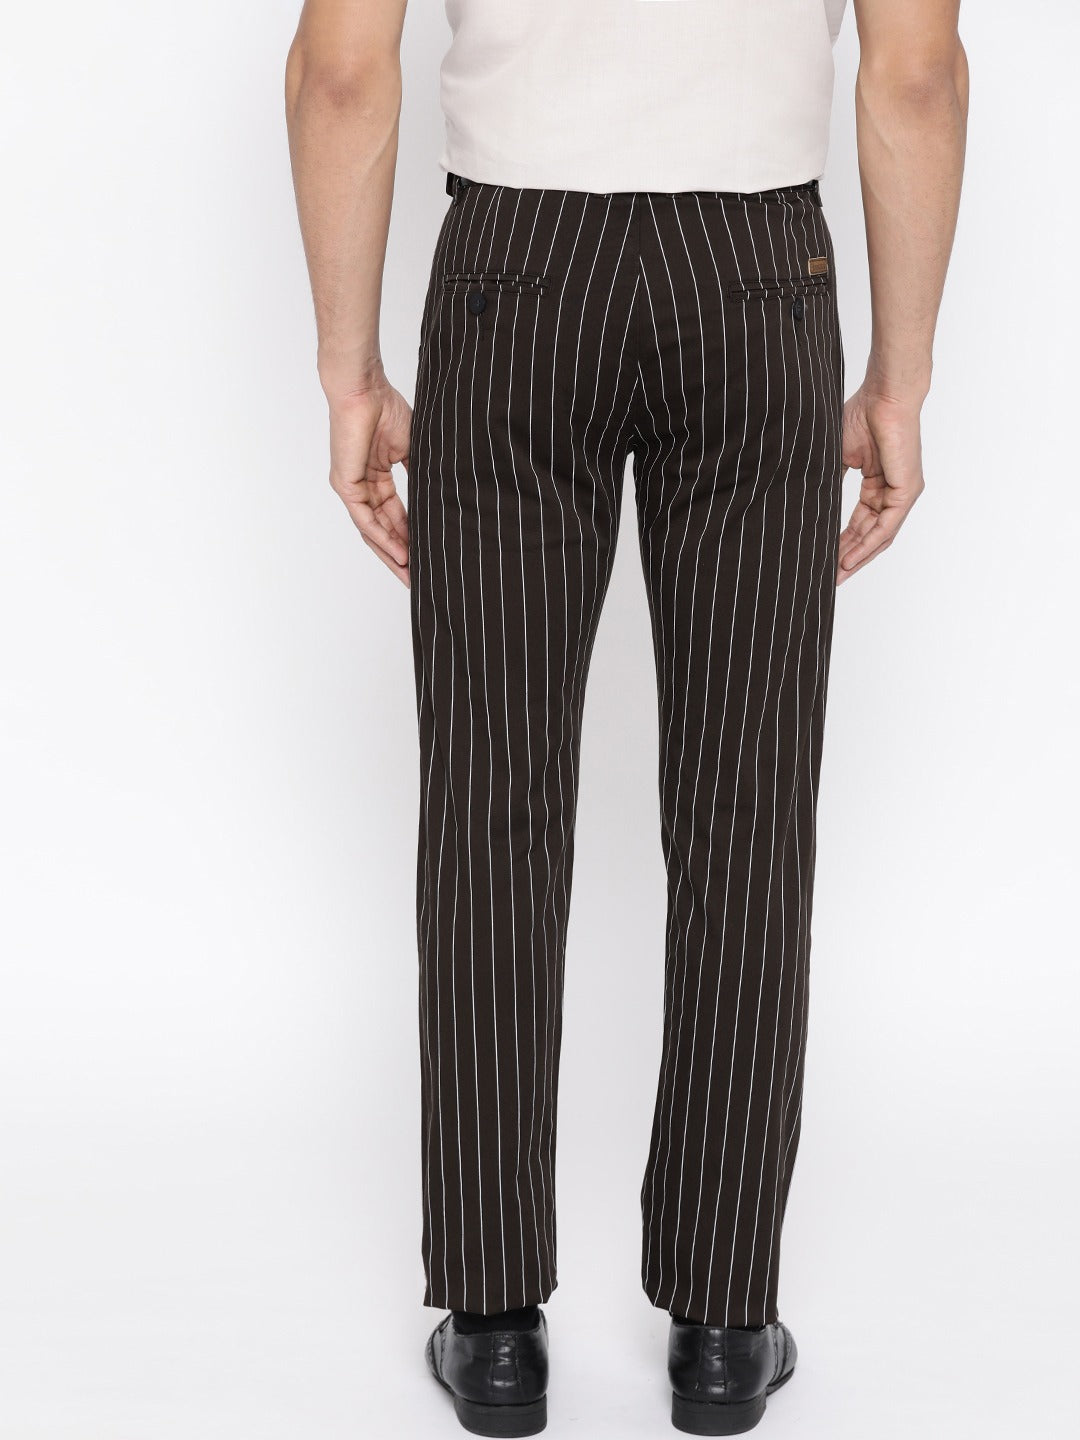 Trousers with side stripes - Black - Men | H&M IN